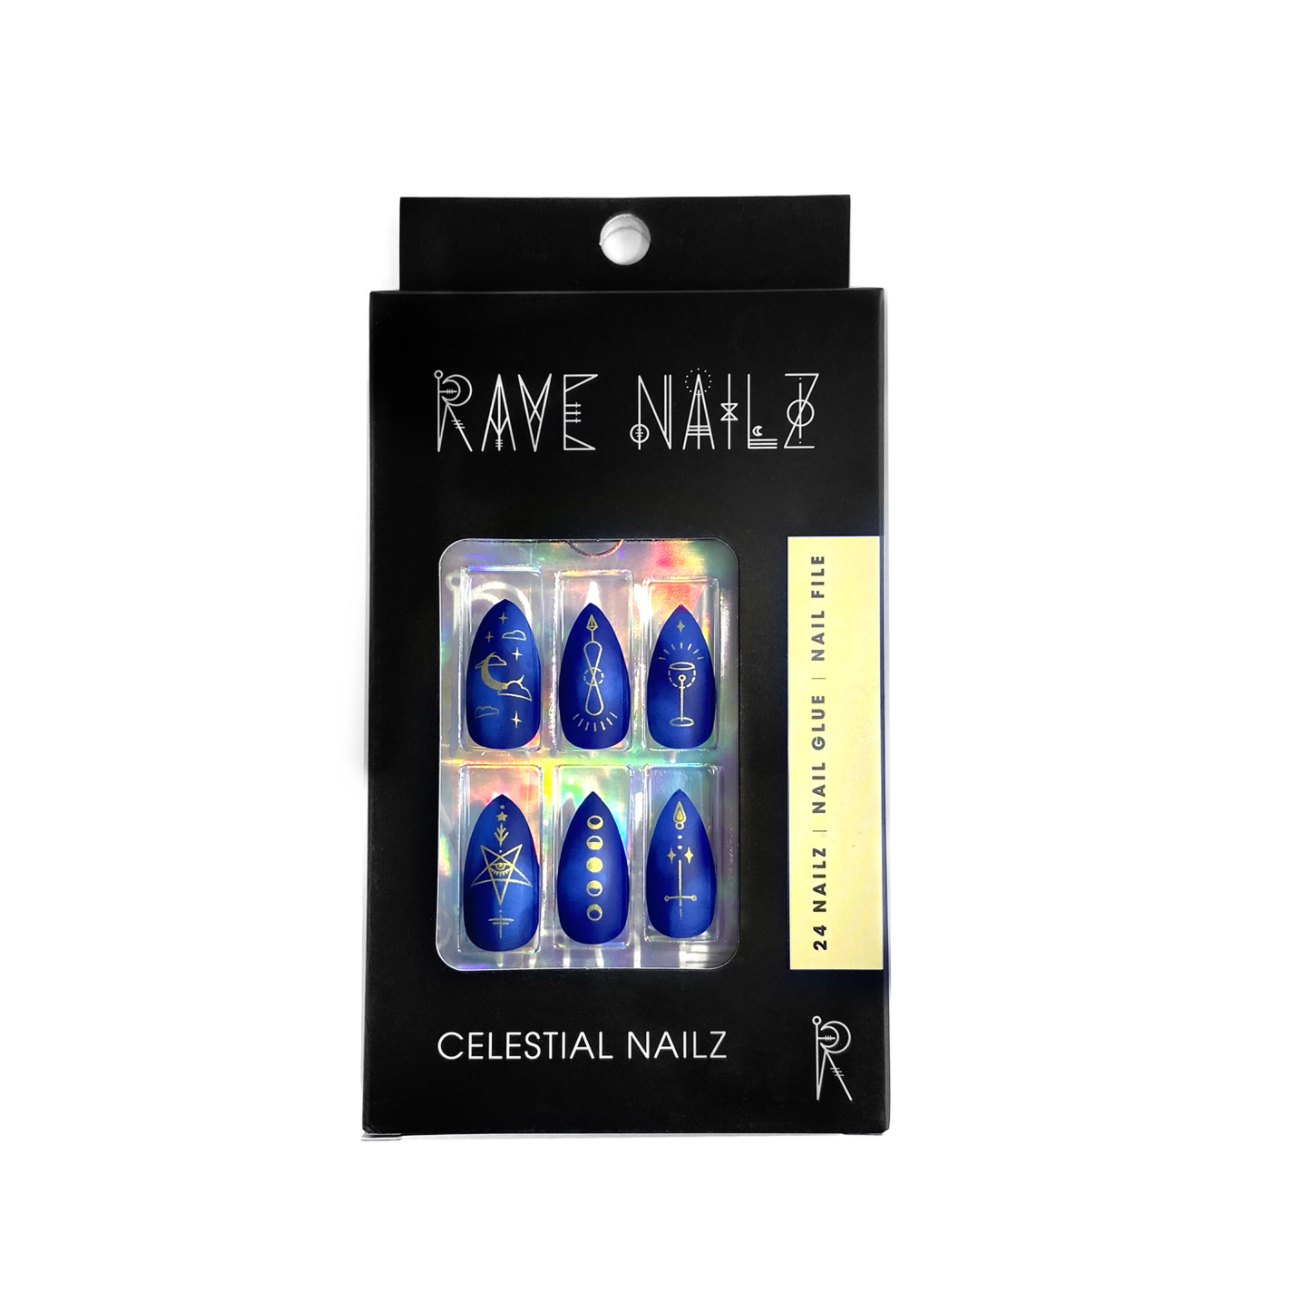 Blue and gold celestial design press on nails in box on white background.